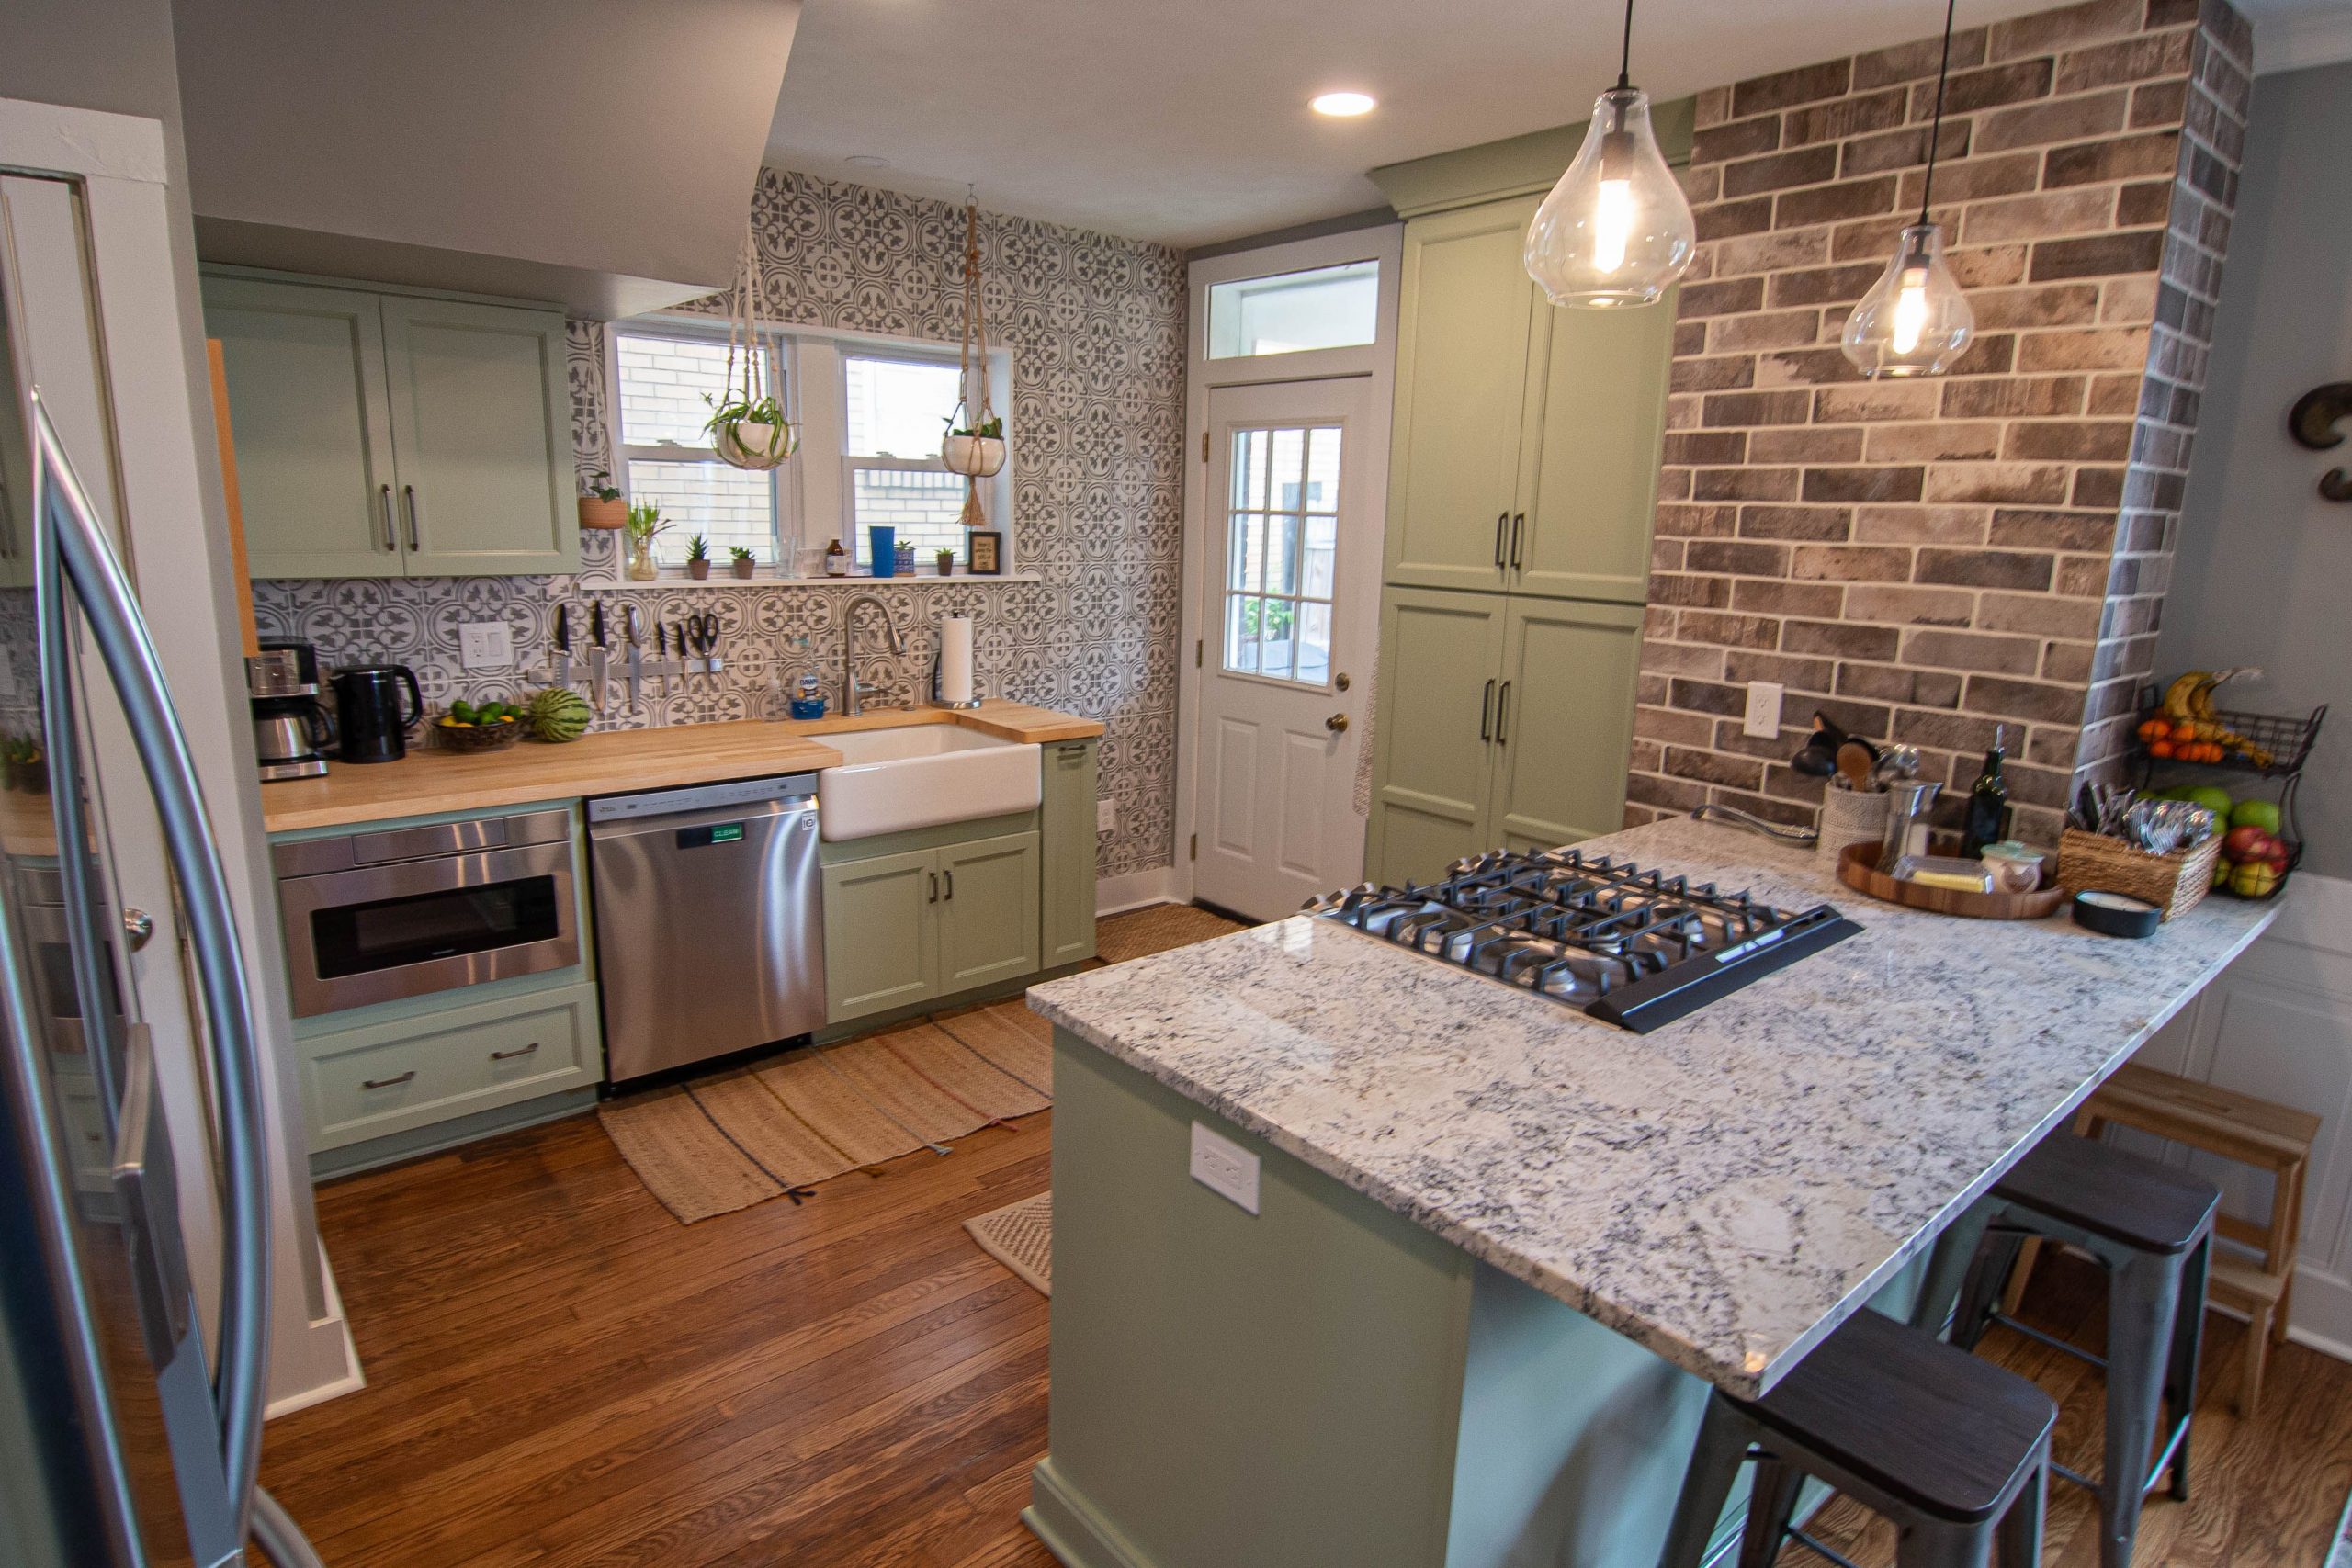 Rustic Sewickley Elegance in this Quaint Farmhouse Style Kitchen